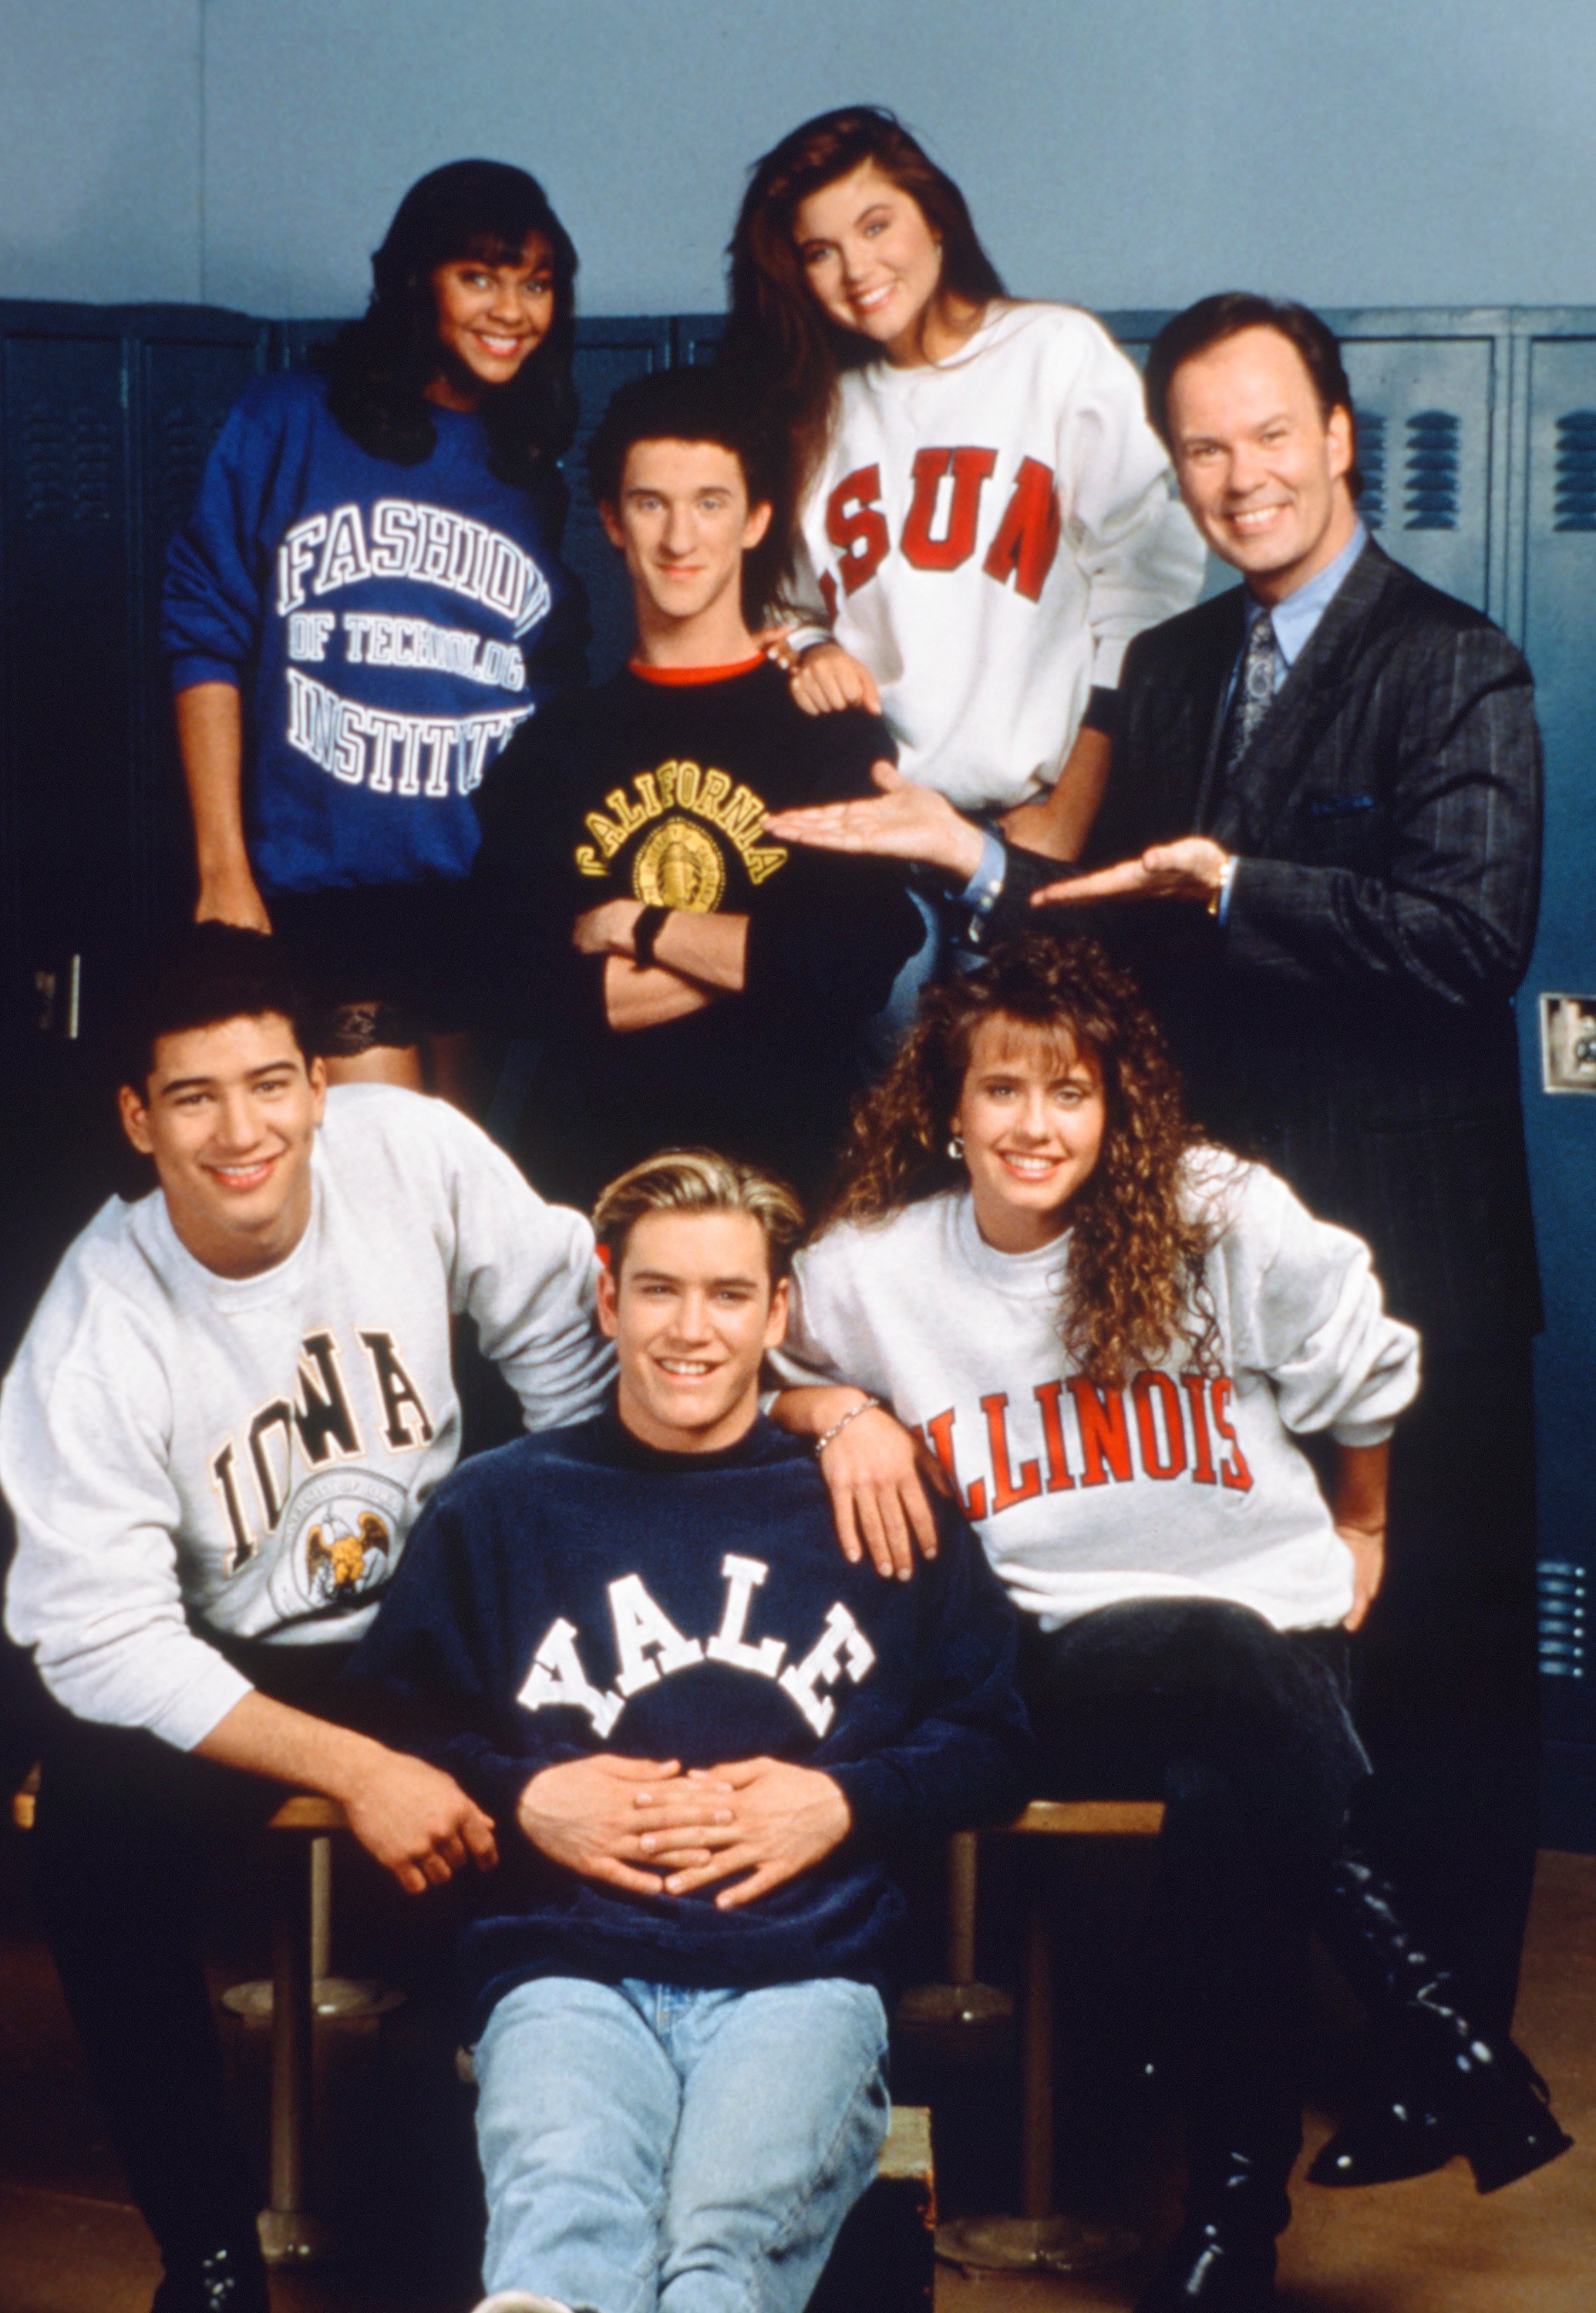 The cast of 'Saved by the Bell' season 4 are seen wearing college sweatshirts with Mr. Belding